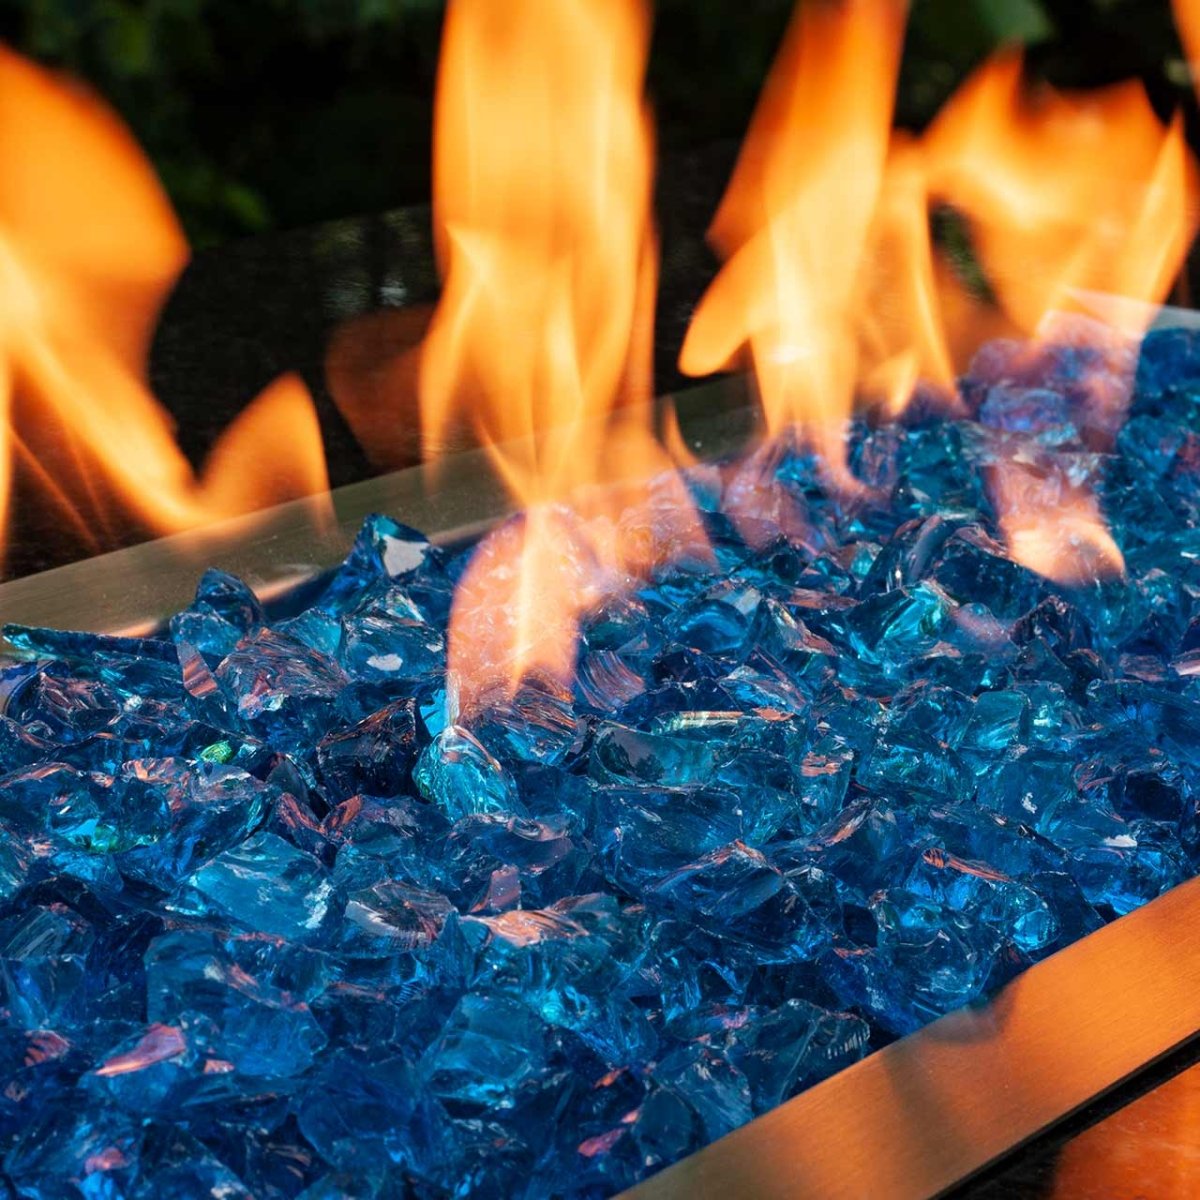 Crystal Turquoise Fire Glass - American Specialty Glass